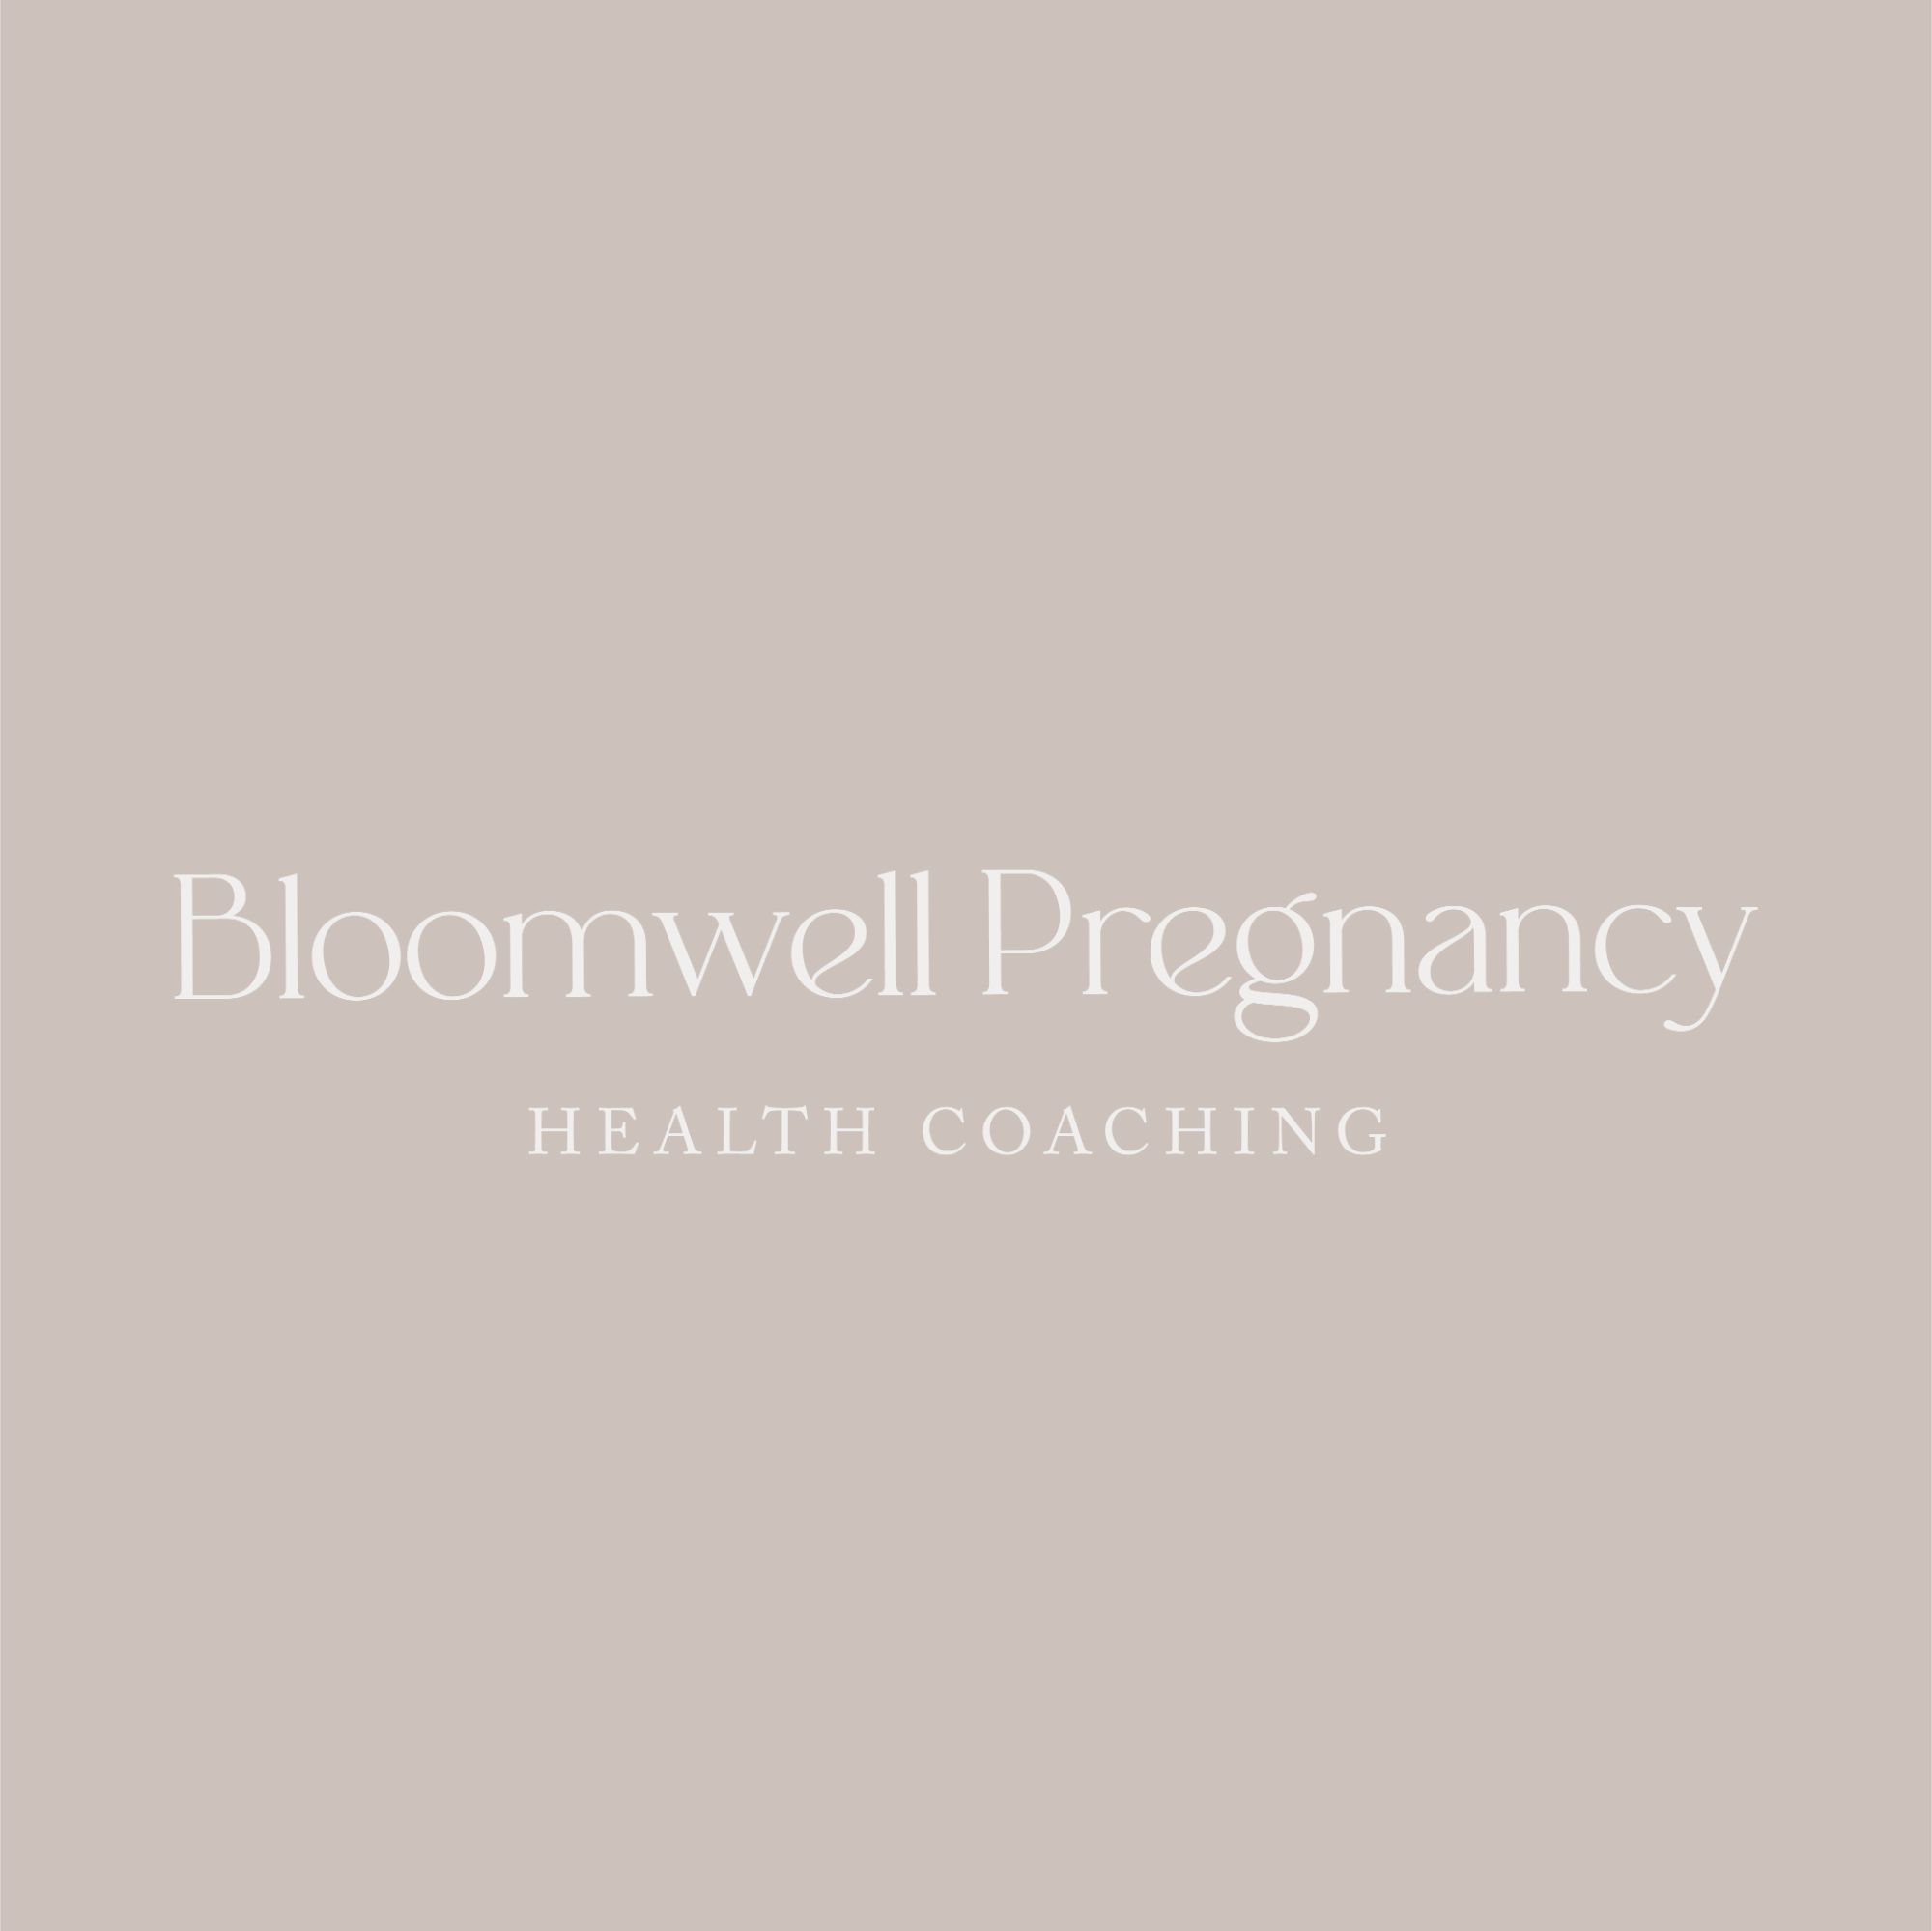 Bloomwell pregnancy online health coaching partnership